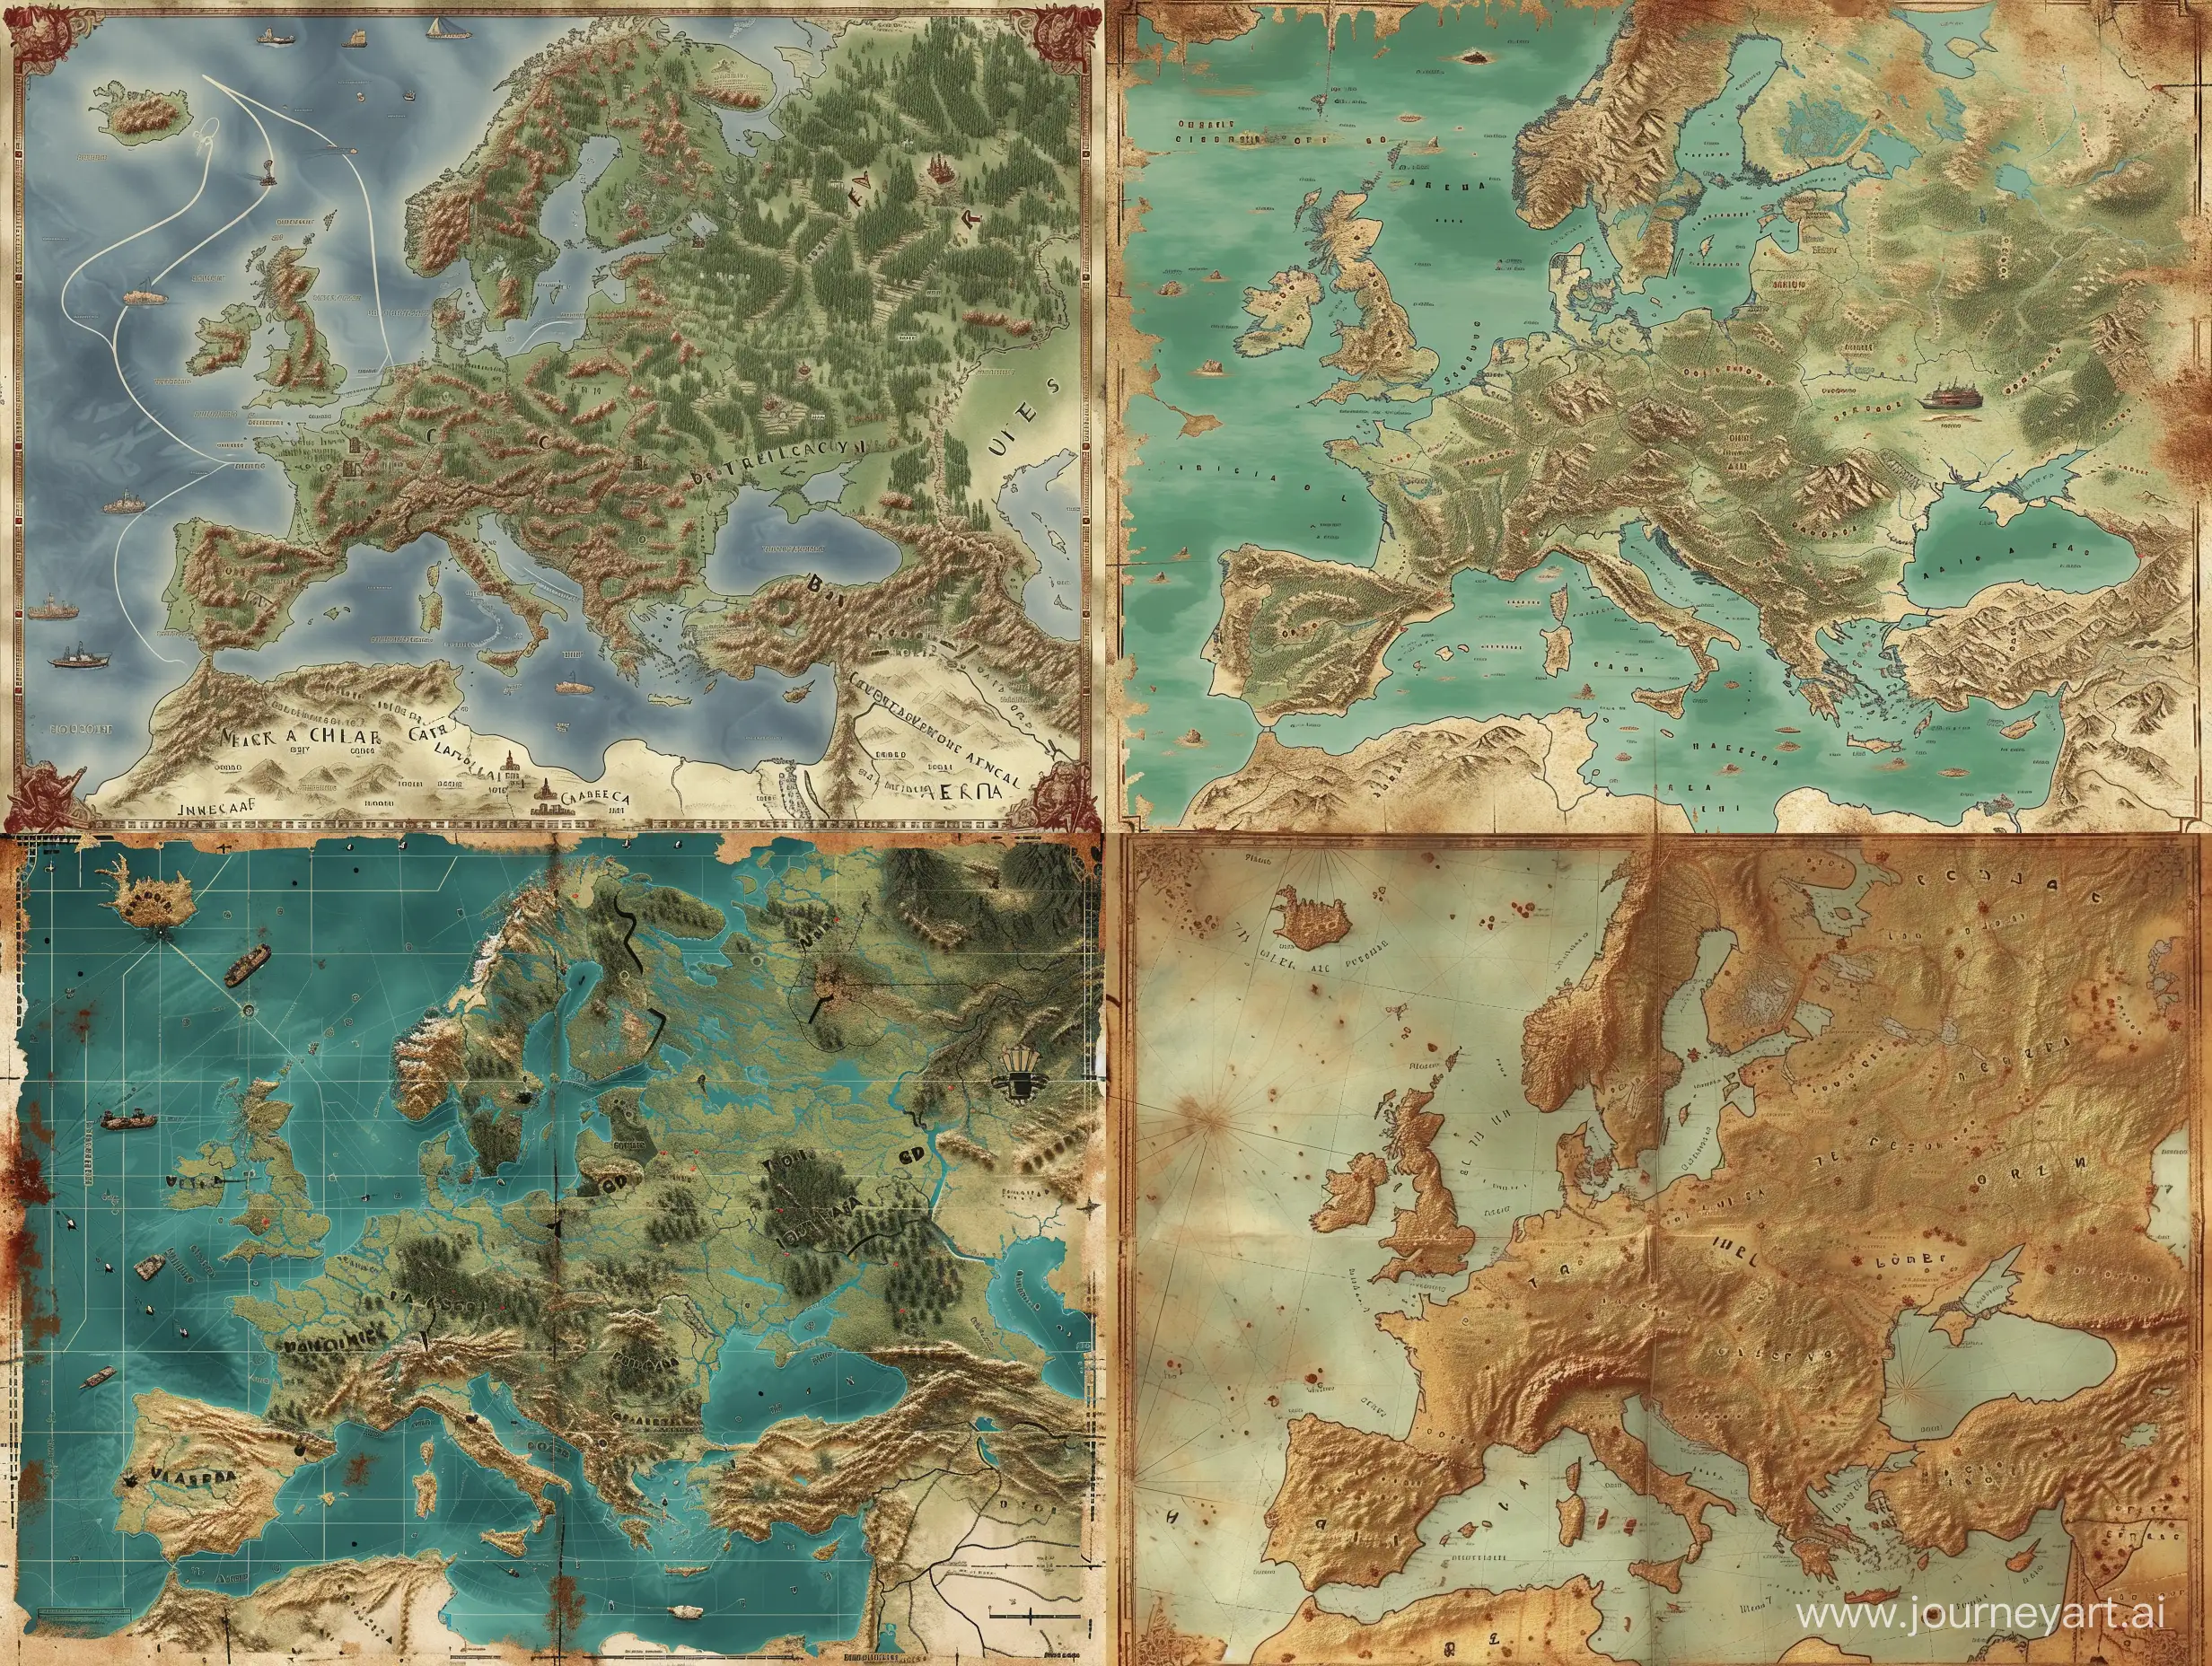 PostApocalyptic-Map-of-Europe-Artistic-Vision-of-a-Desolate-Continent